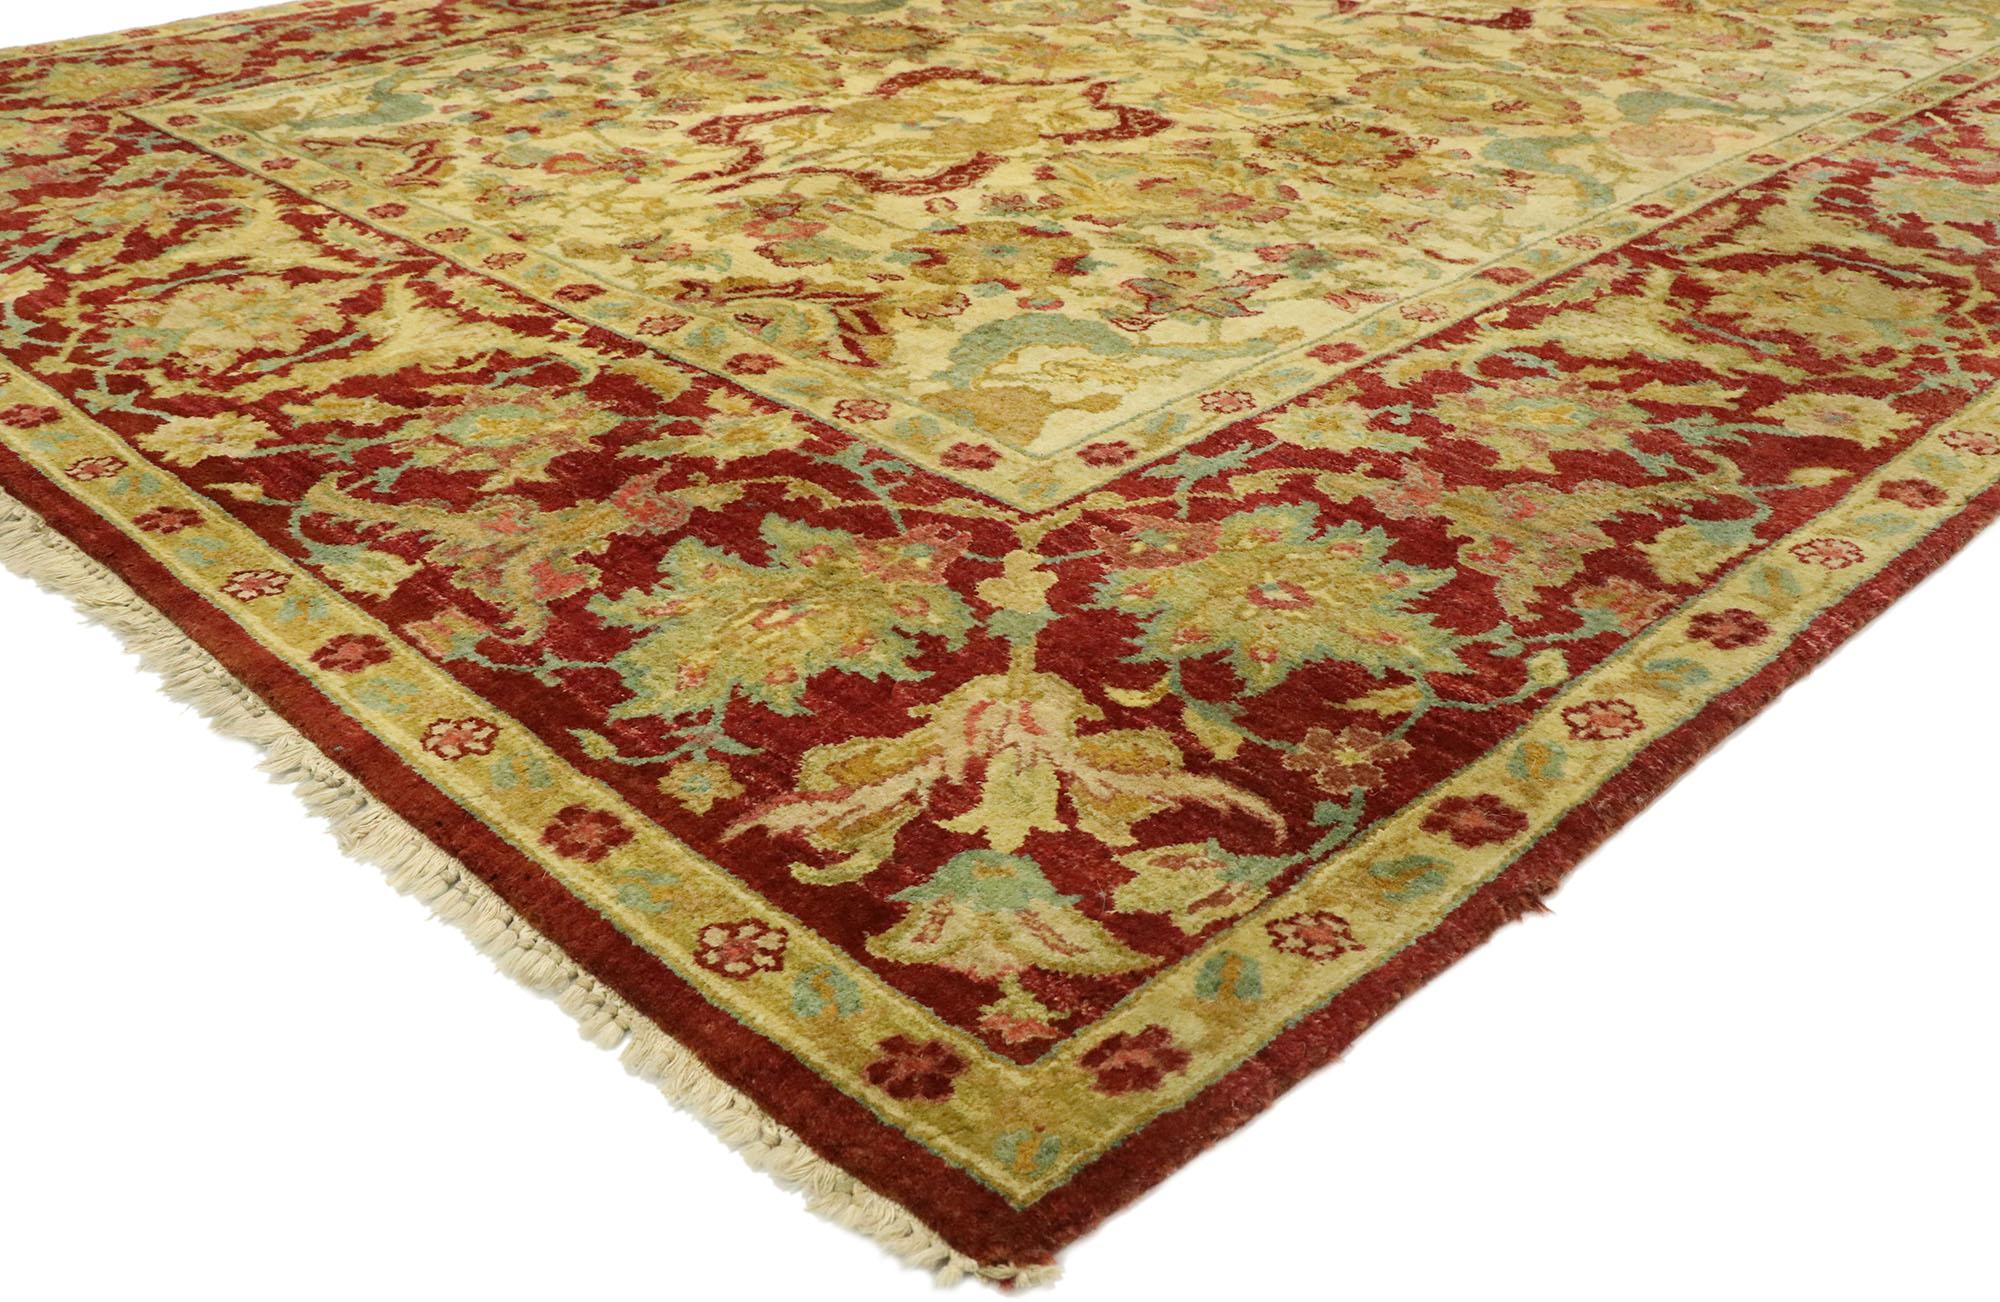 77517, vintage Indian rug with Arts & Crafts style inspired by William Morris. The architectural elements of naturalistic forms combined with Arts & Crafts style, this hand knotted wool vintage Indian rug draws inspiration from William Morris. It